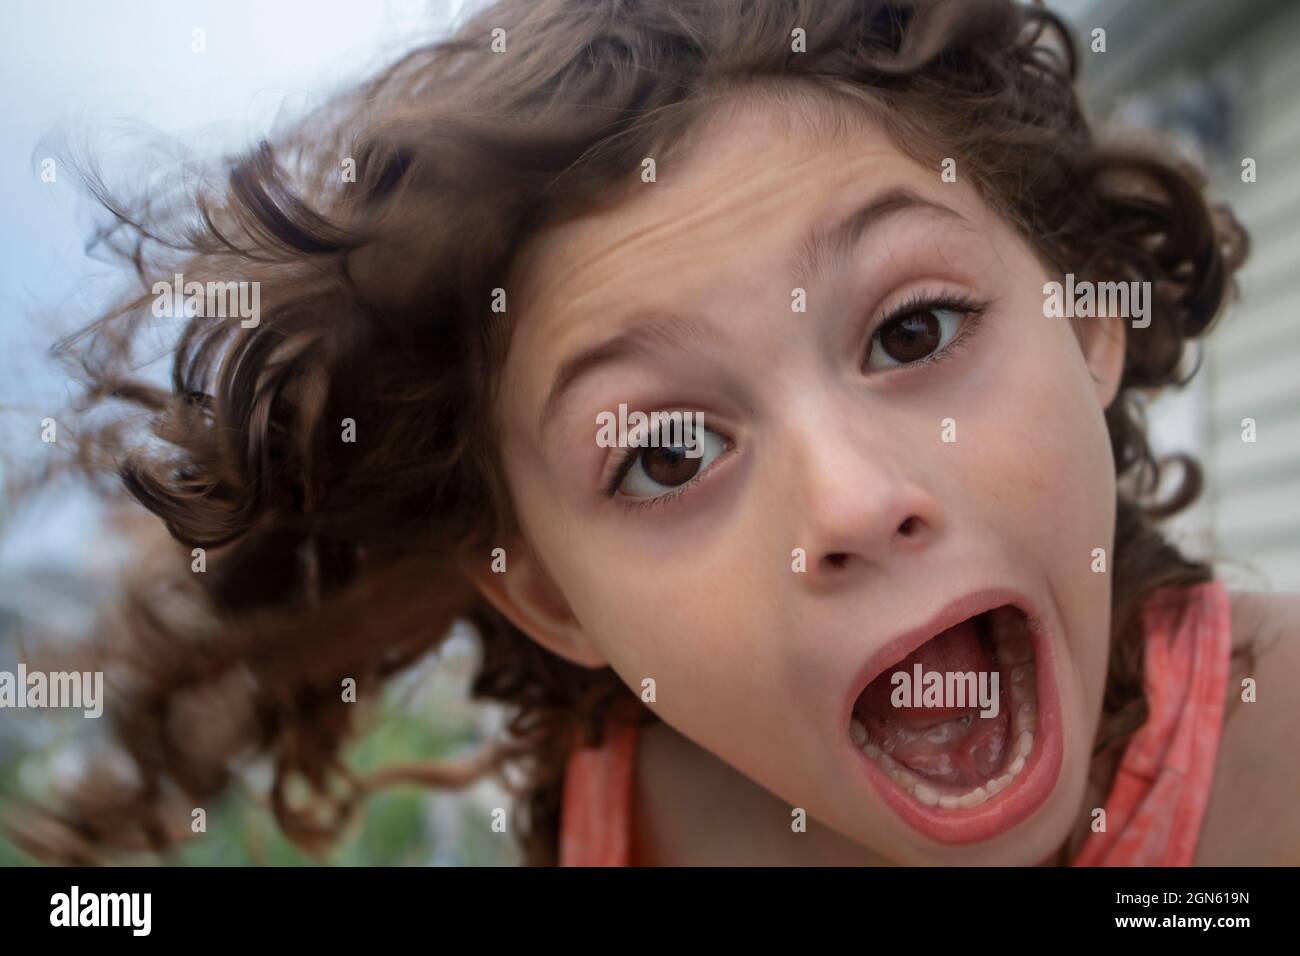 close up portrait of young girl having fun open mouth making silly faces at camera on a sunny summer day Stock Photo